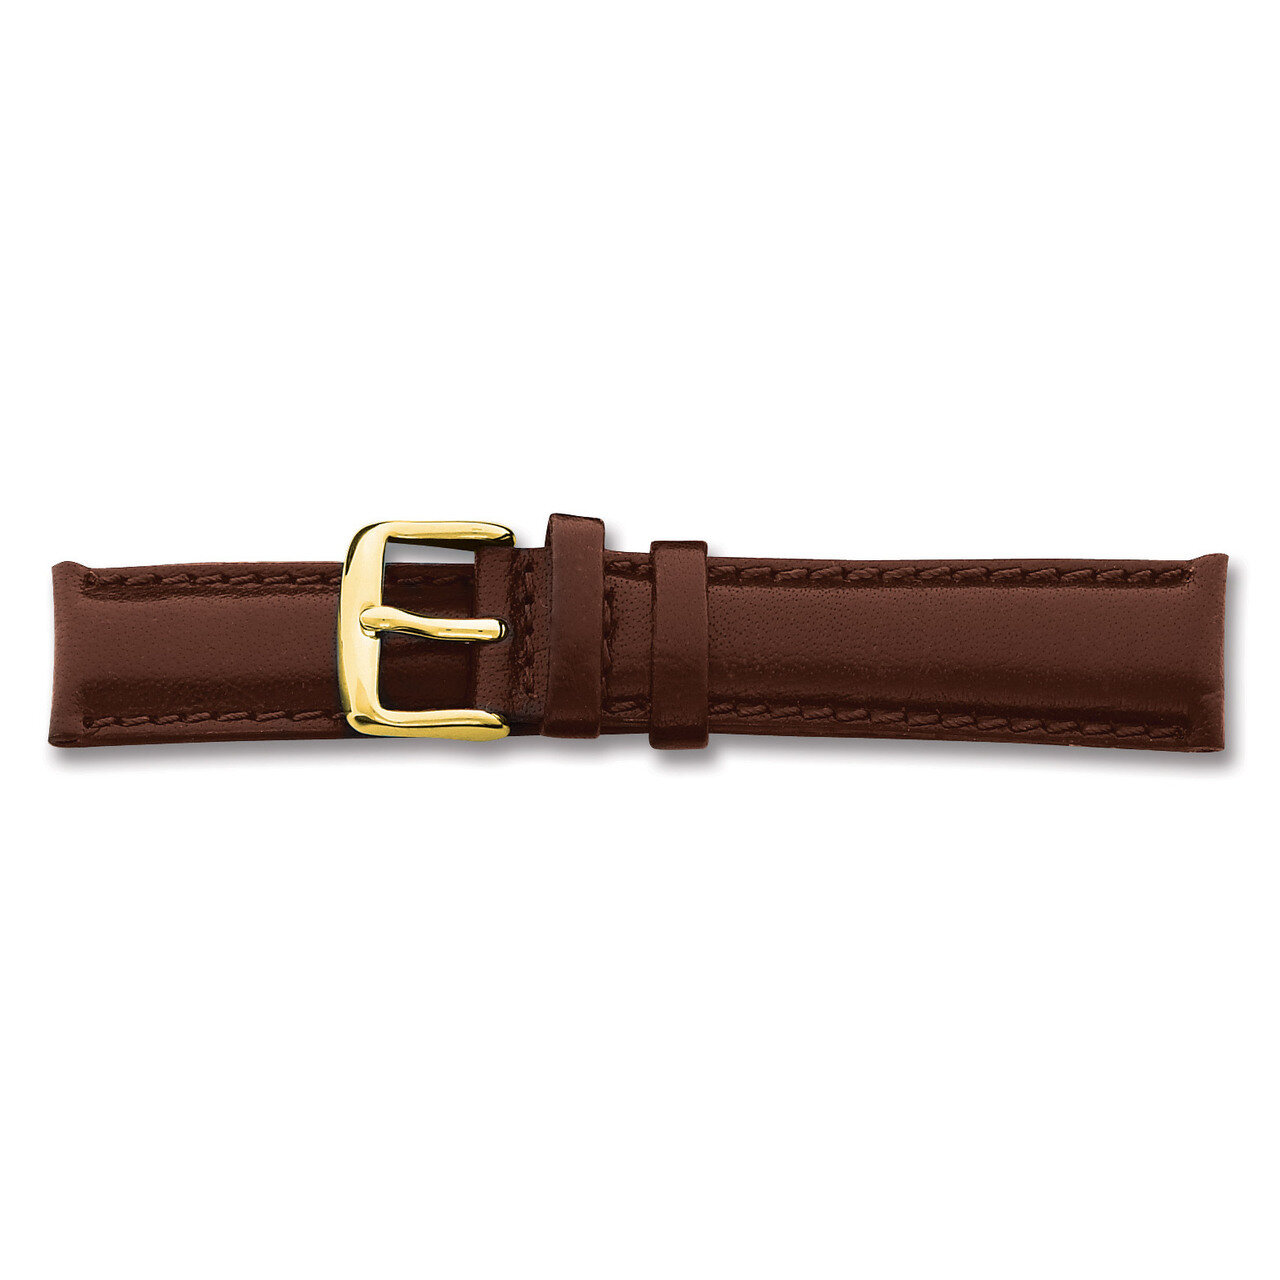 24mm Long Brown Leather Chrono Buckle Watch Band 8.5 Inch Gold-tone BAY140L-24